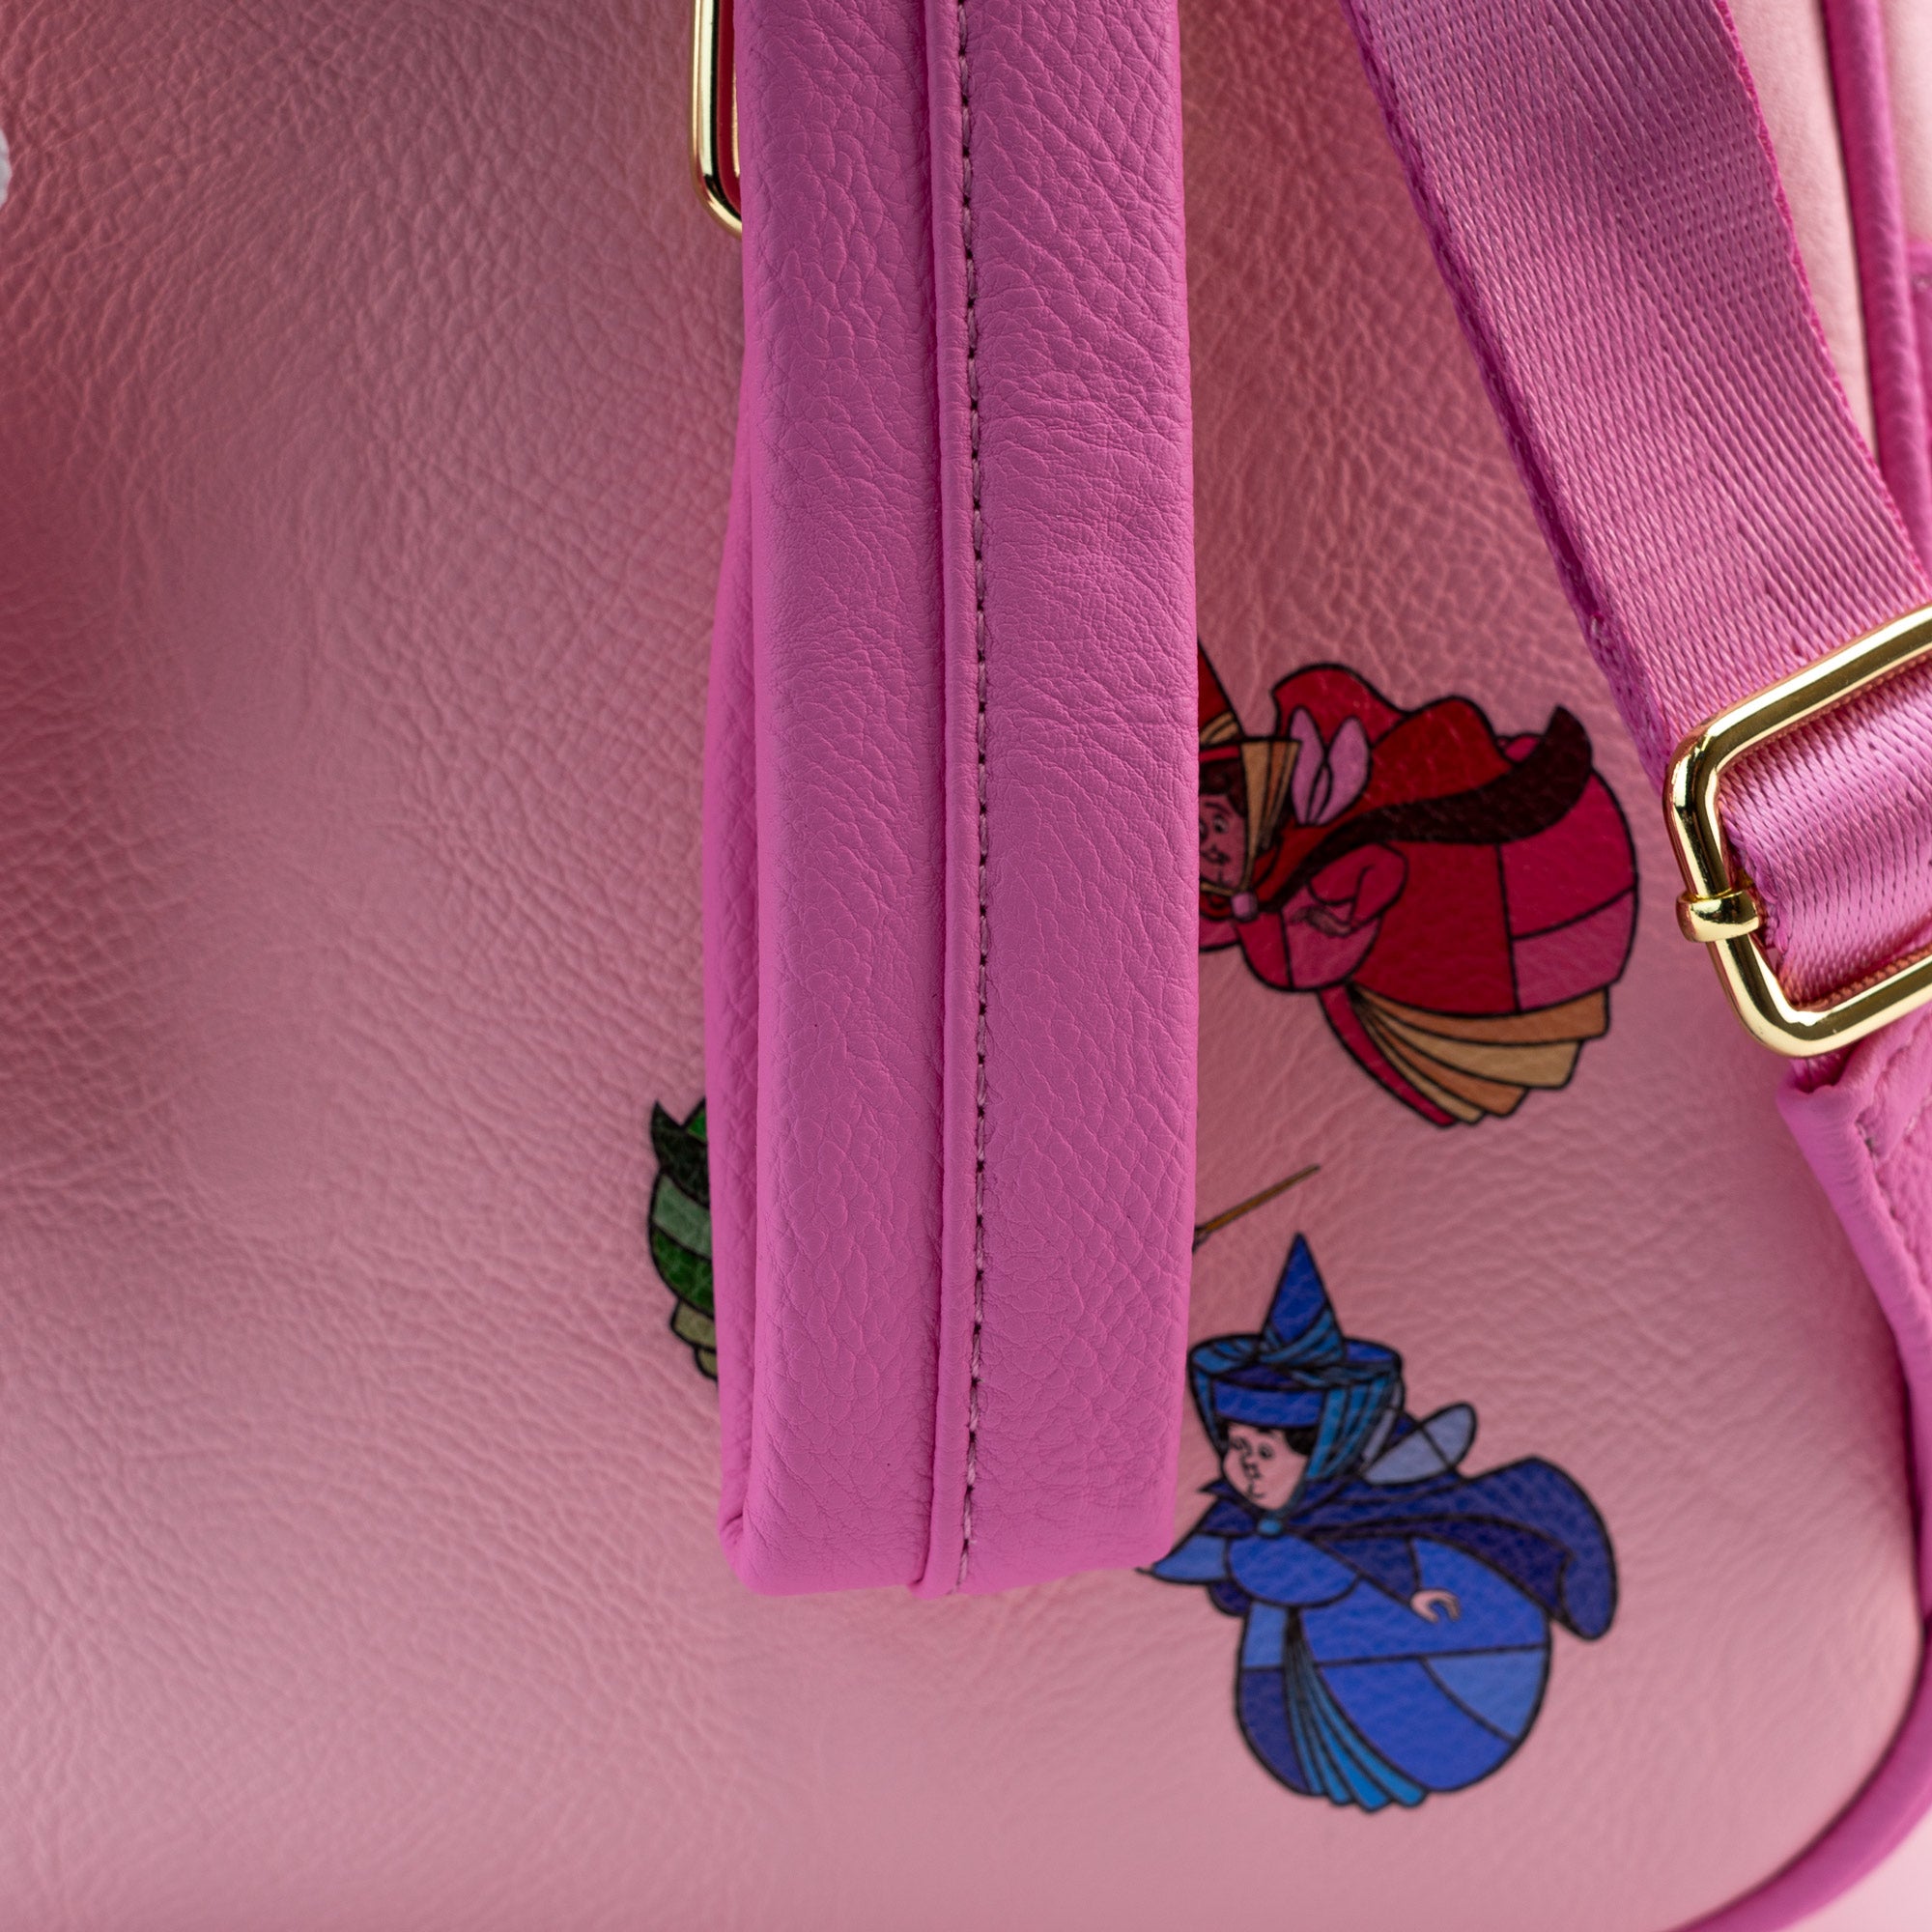 Loungefly x Disney Sleeping Beauty Stained Glass Mini Backpack